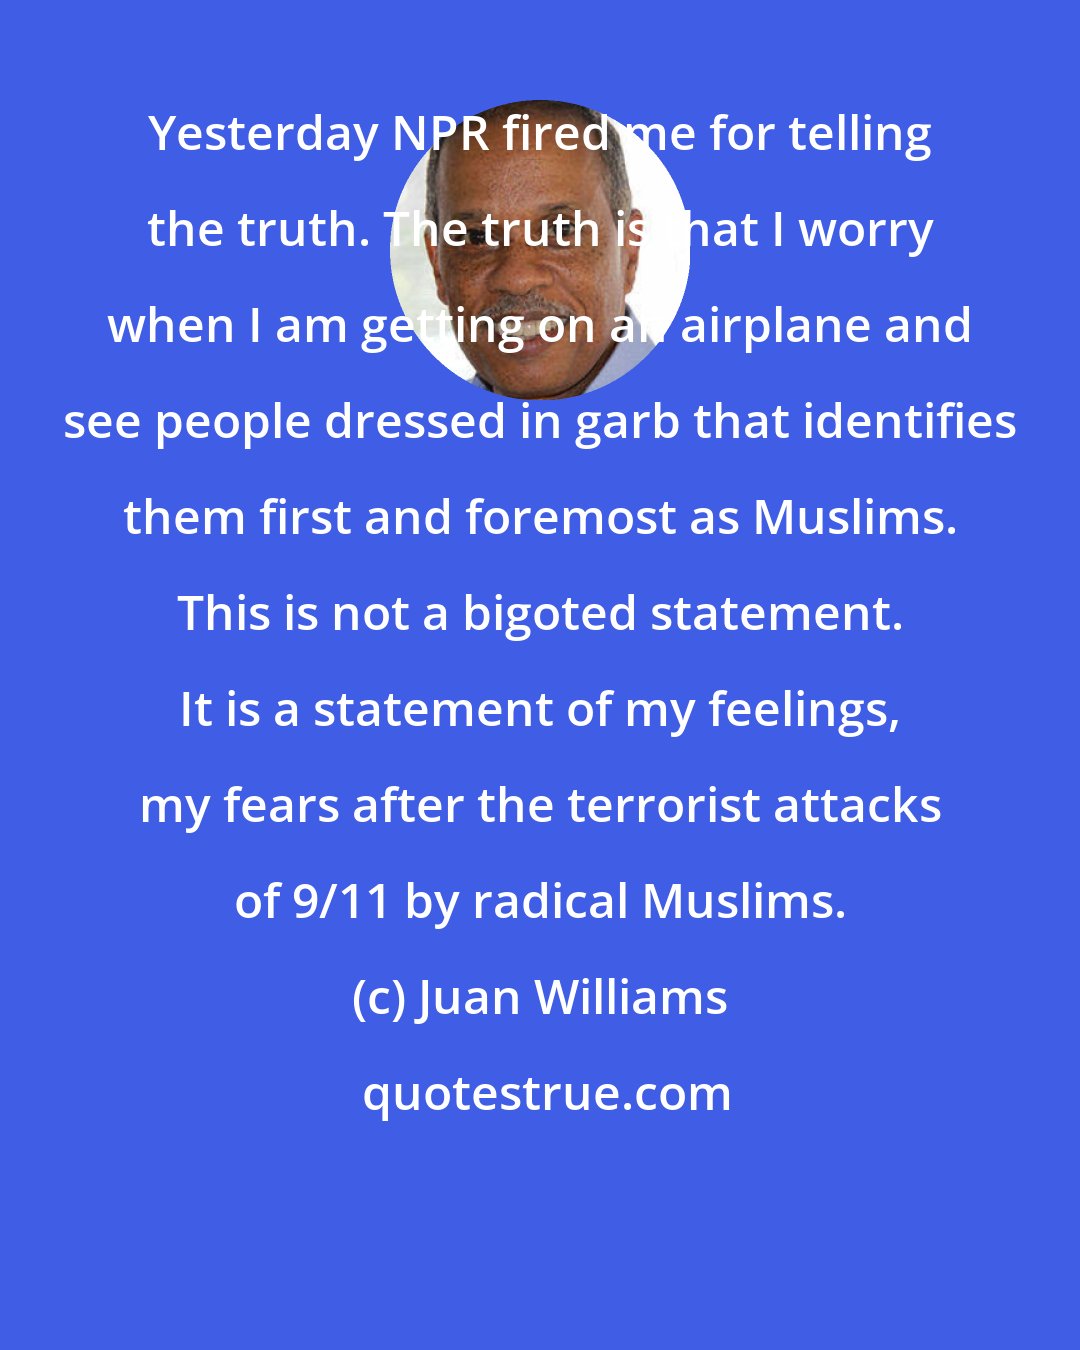 Juan Williams: Yesterday NPR fired me for telling the truth. The truth is that I worry when I am getting on an airplane and see people dressed in garb that identifies them first and foremost as Muslims. This is not a bigoted statement. It is a statement of my feelings, my fears after the terrorist attacks of 9/11 by radical Muslims.